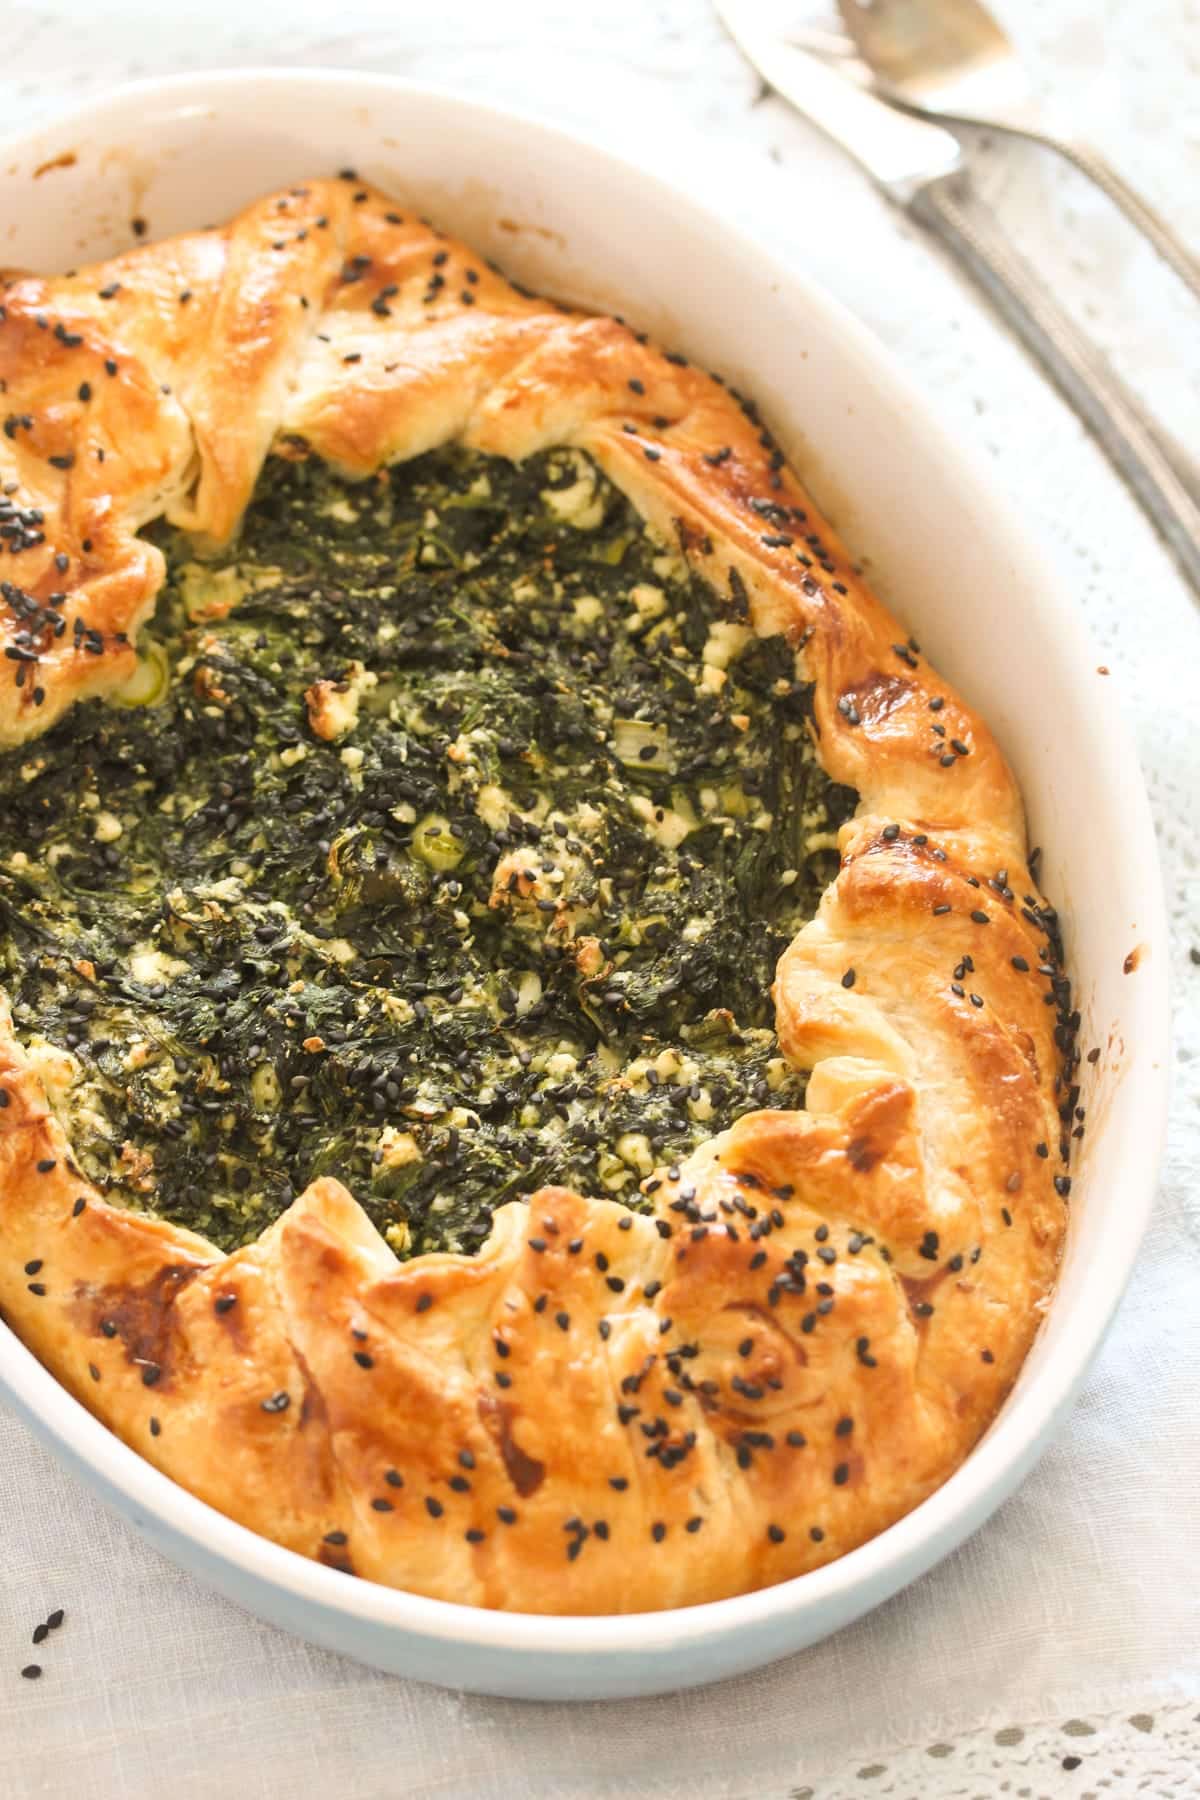 golden brown puff pastry spanakopita sprinkled with black sesame seeds.